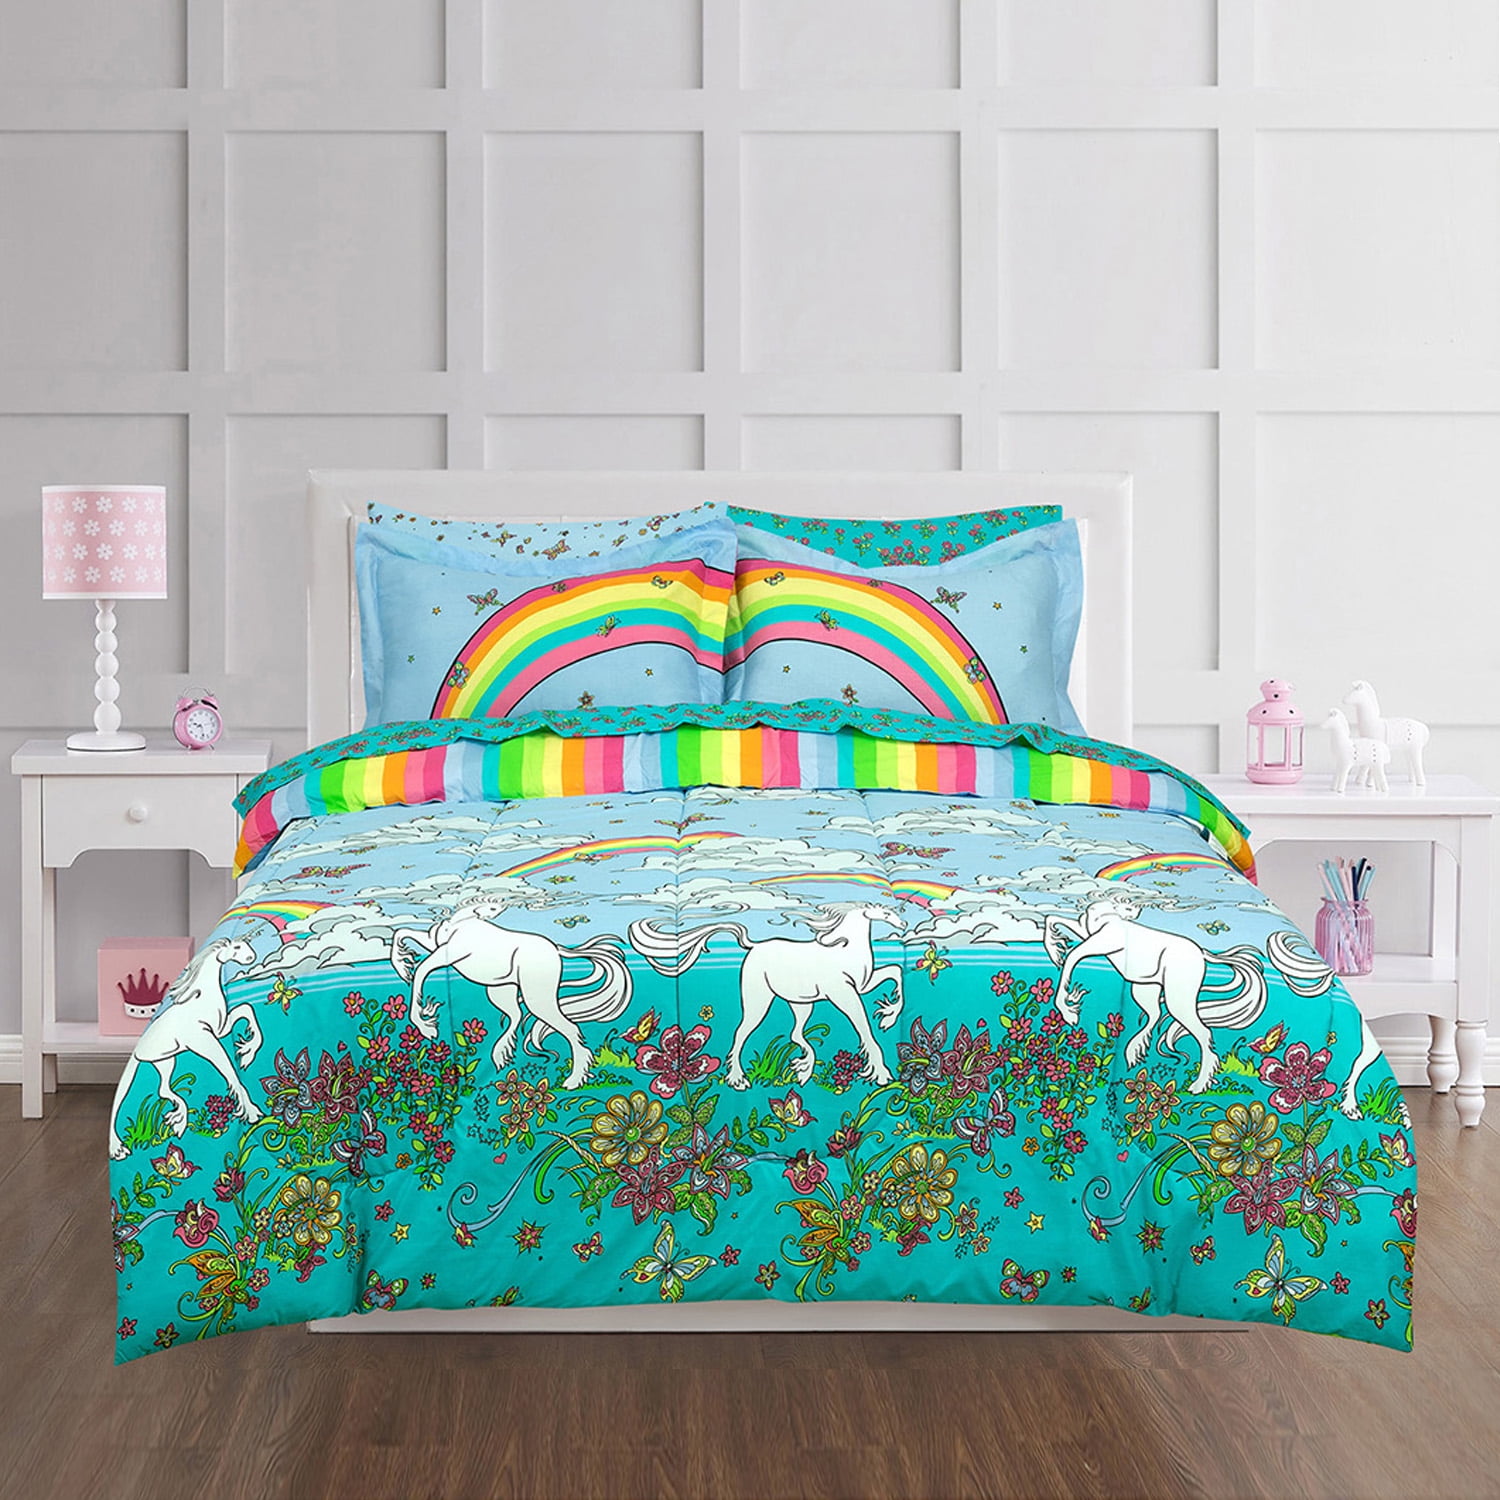 Doll House Children Bedding Set In colourful Elephant Fabric